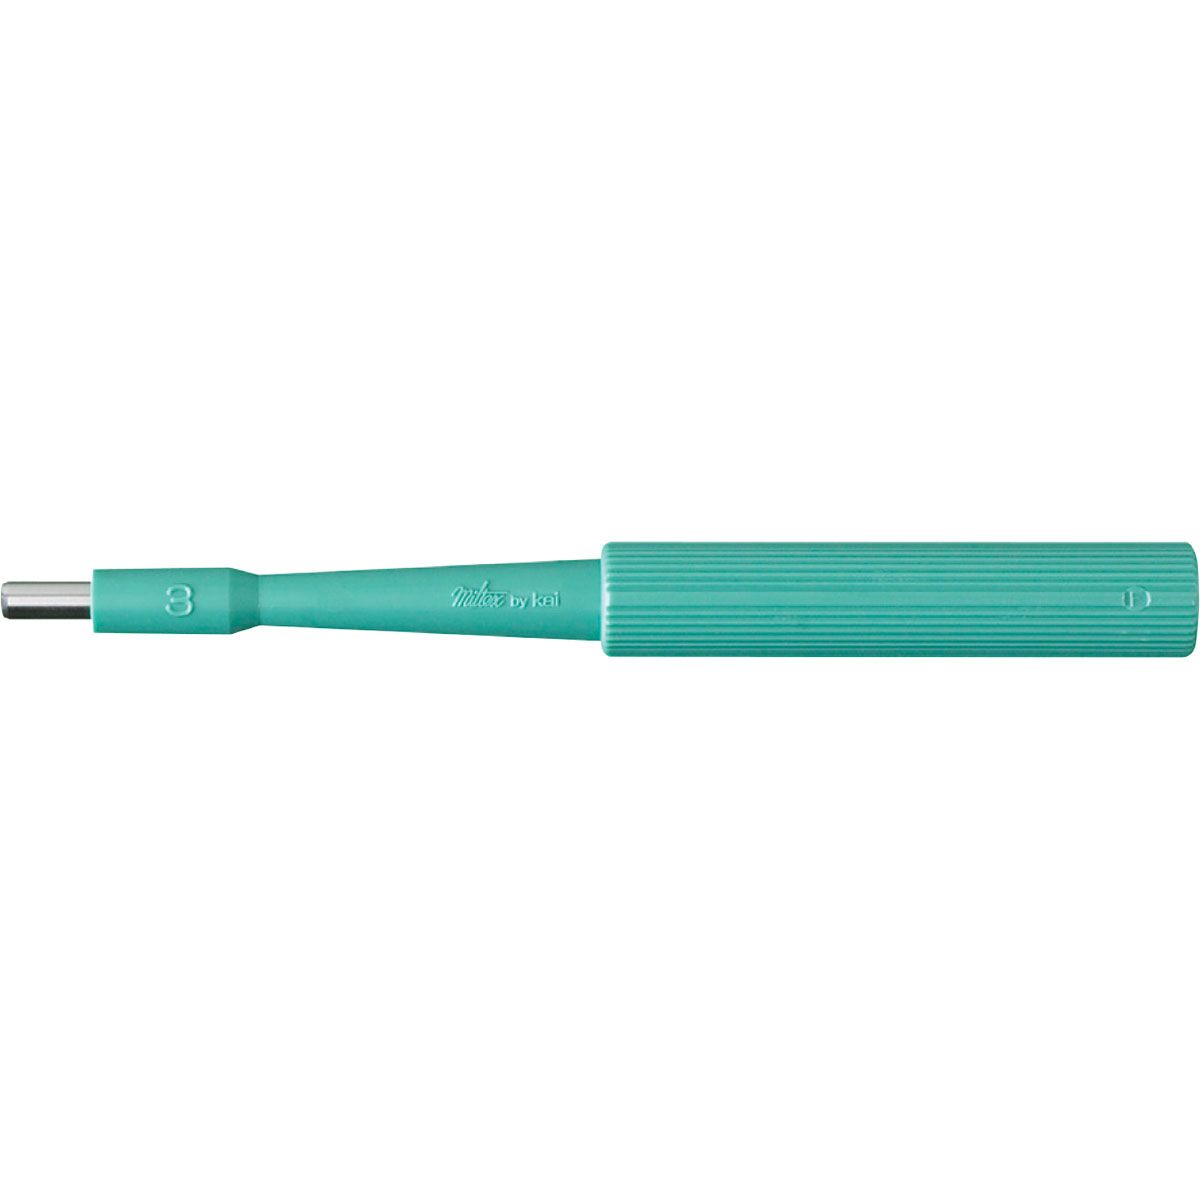 Disposable Biopsy Punch, Various Sizes-501818